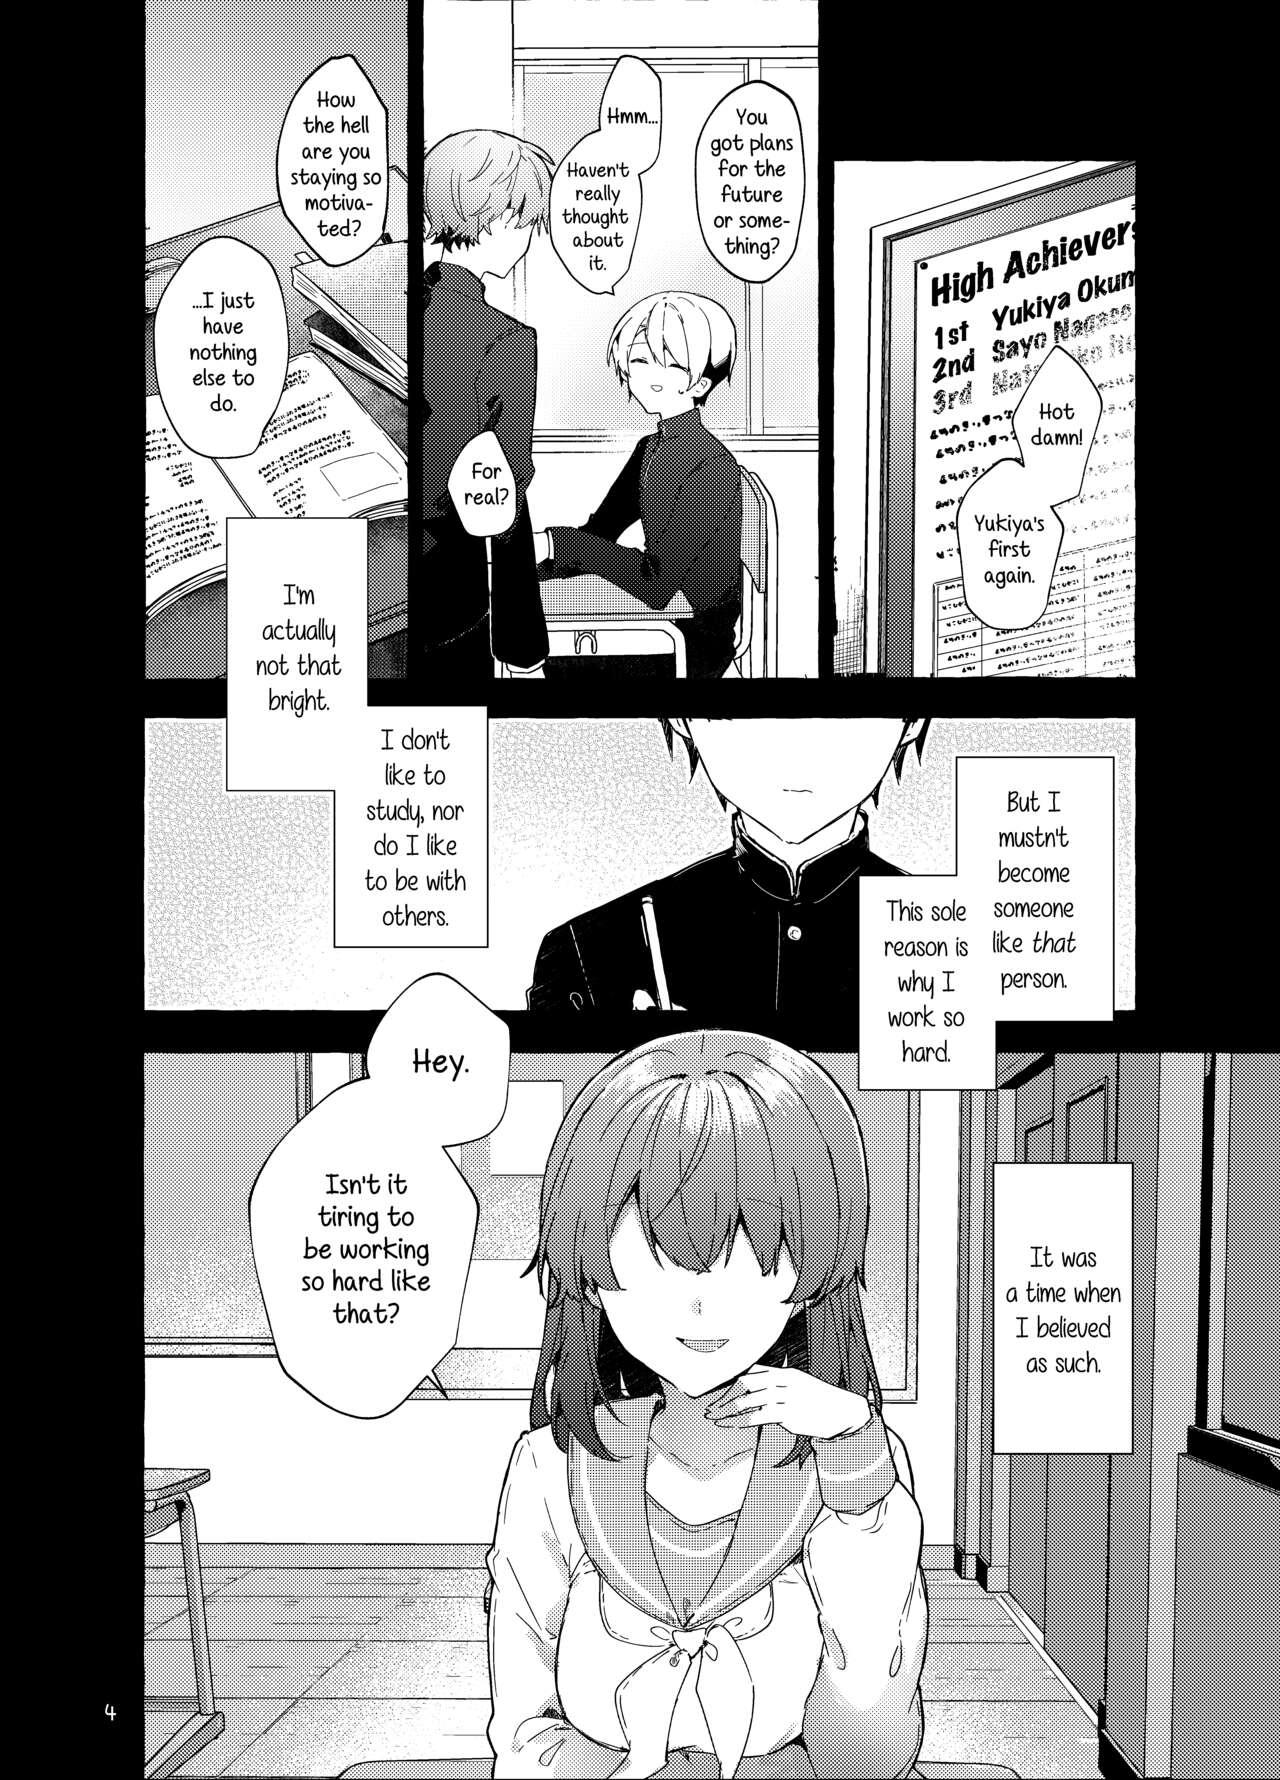 Swingers Kyou kara Waruiko. Zoku | I'll Be a Bad Kid From Now On. 2 - Original Young Tits - Page 5